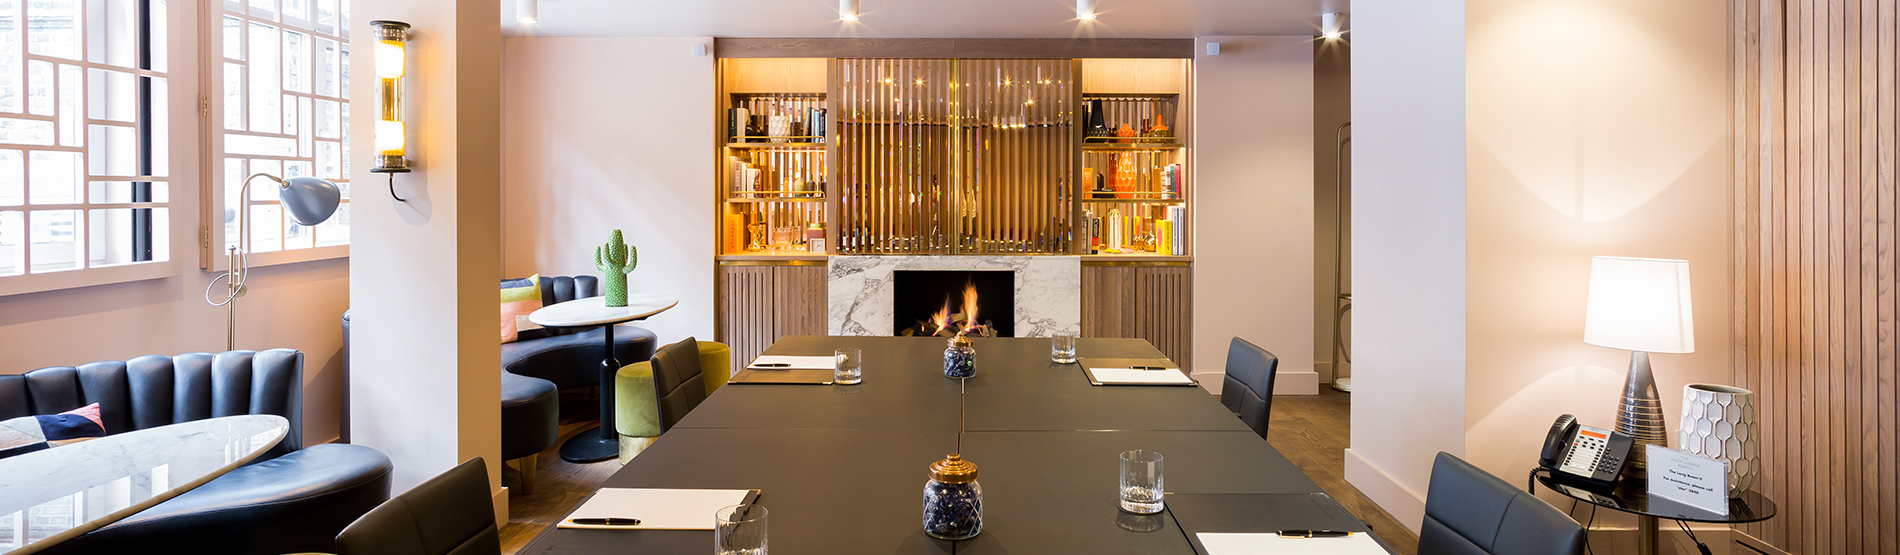 Meeting room at The Marylebone